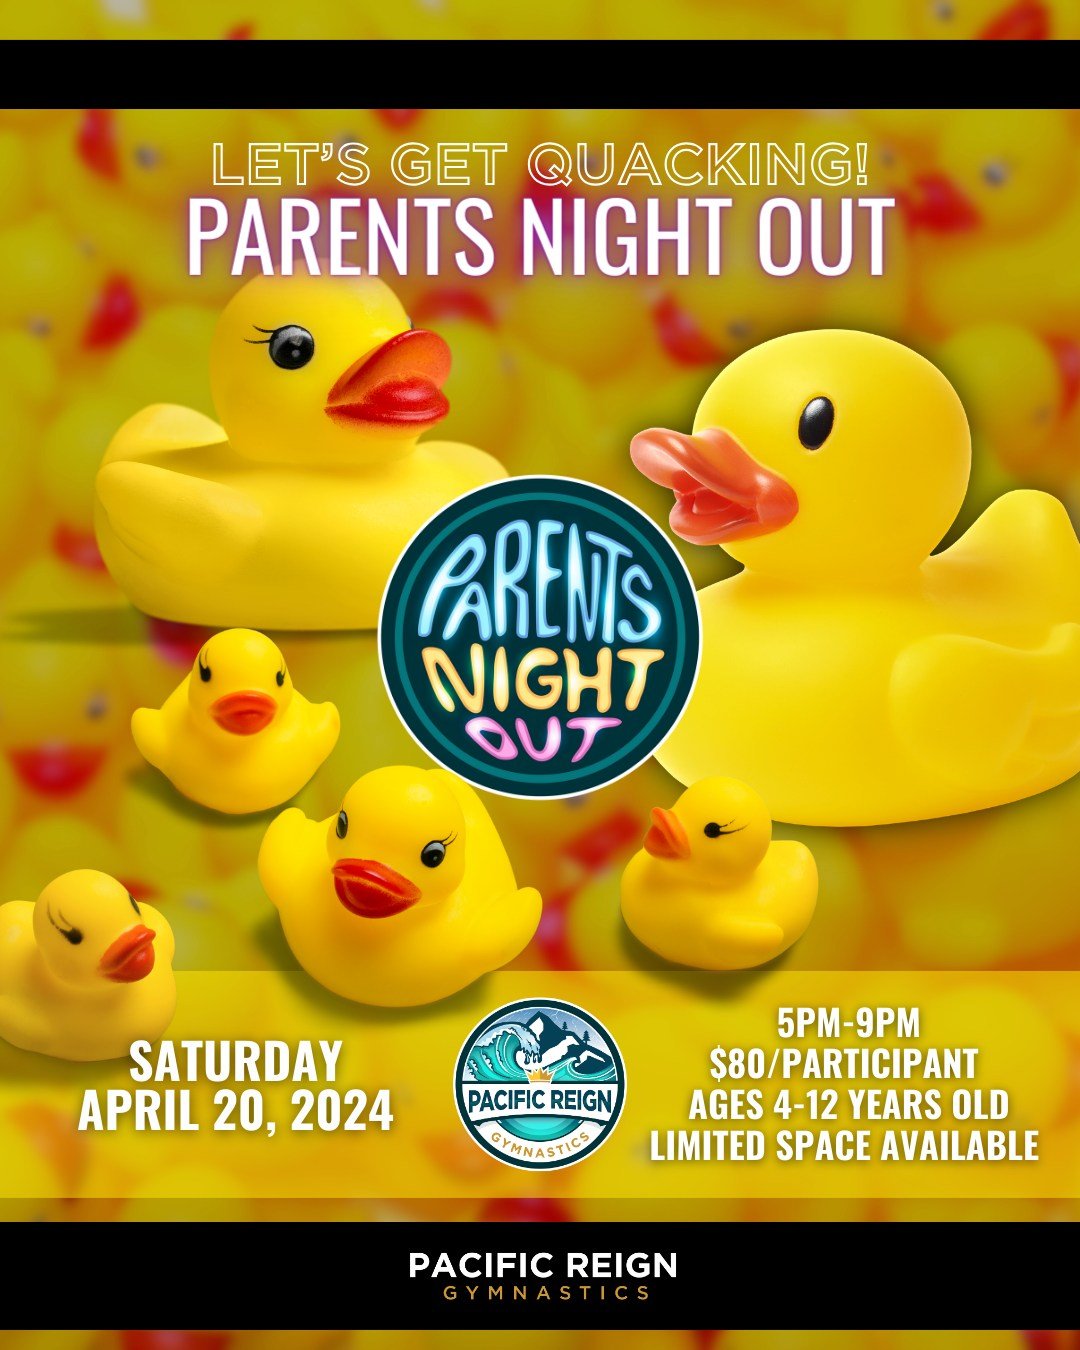 🐤 𝙇𝙚𝙩'𝙨 𝙜𝙚𝙩 𝙦𝙪𝙖𝙘𝙠𝙞𝙣𝙜!

Back by popular demand, we are hosting a Parents Night Out event THIS SATURDAY, April 27th from 5-9pm! All the details are on the slide and we hope you will join us! Limited space is available!

🔗 Link in Bio!